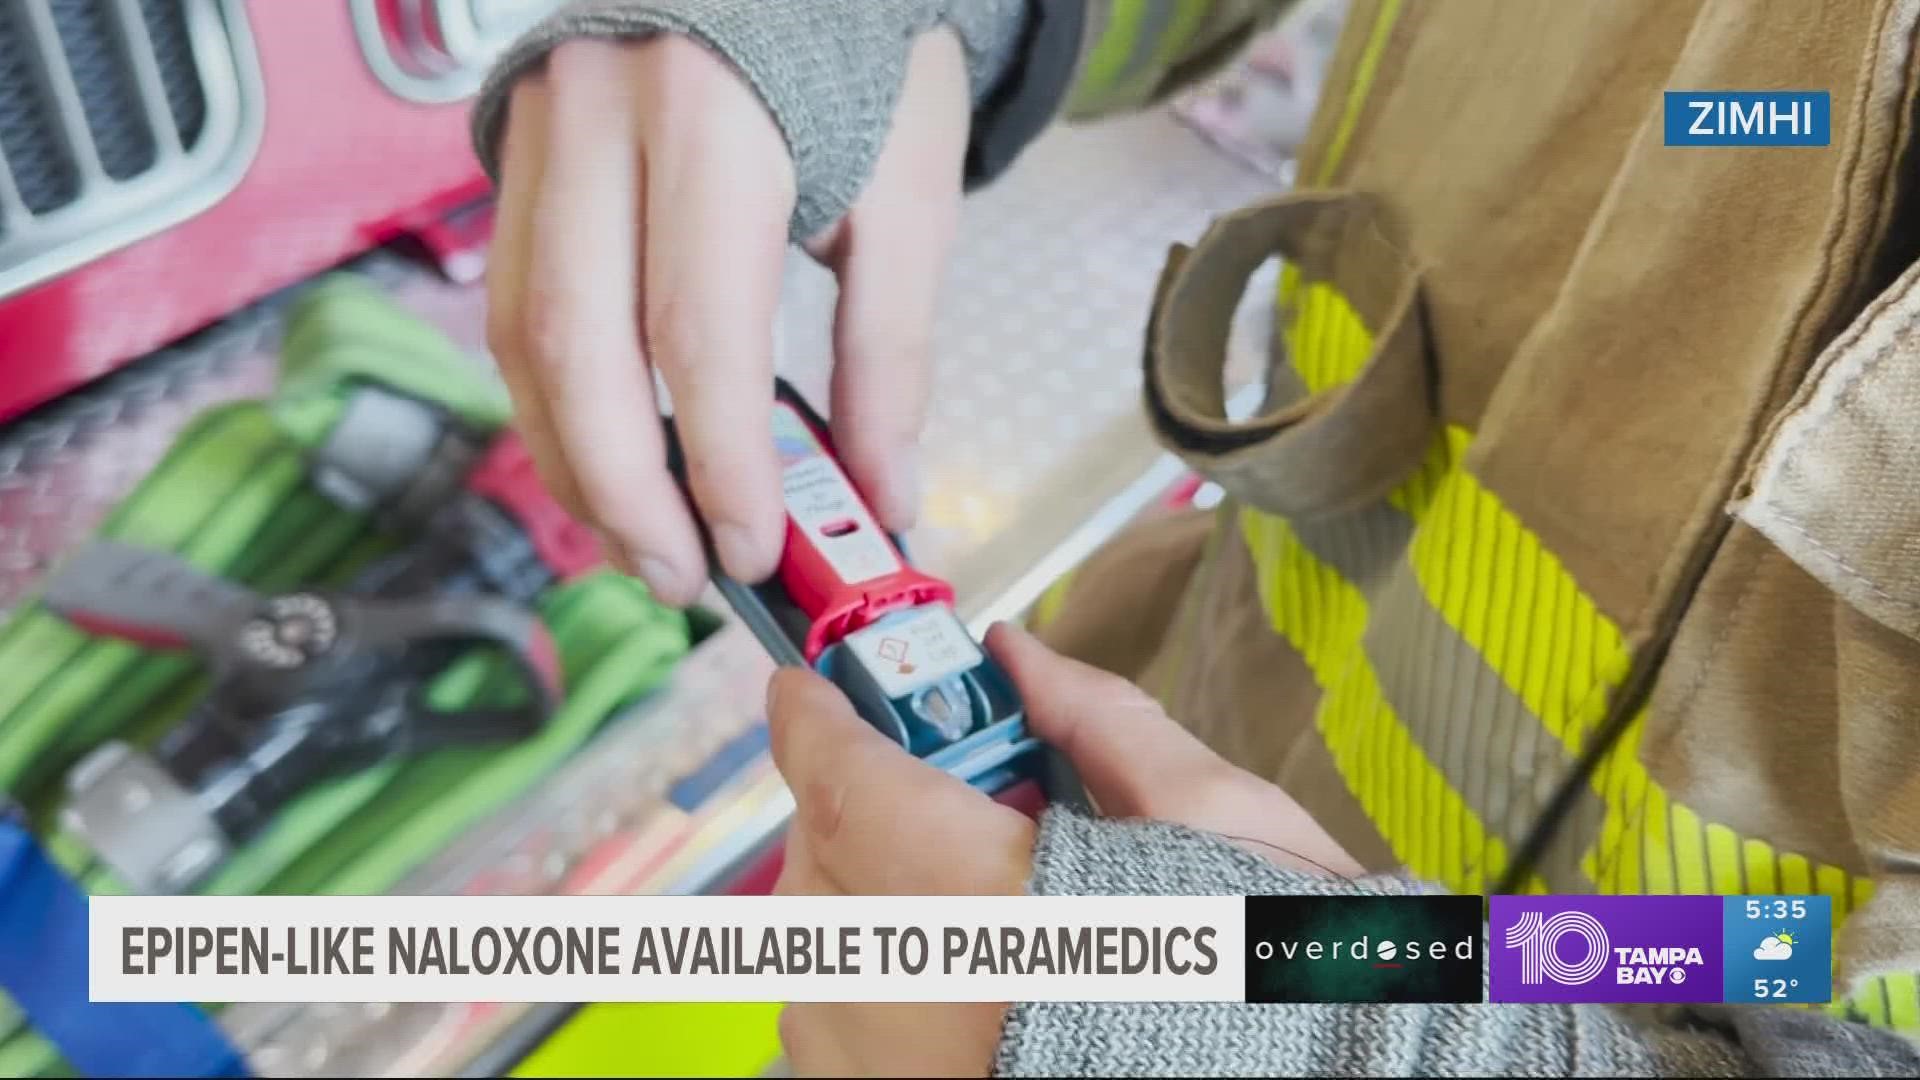 A higher dose of naloxone is now available through the HEROS program.